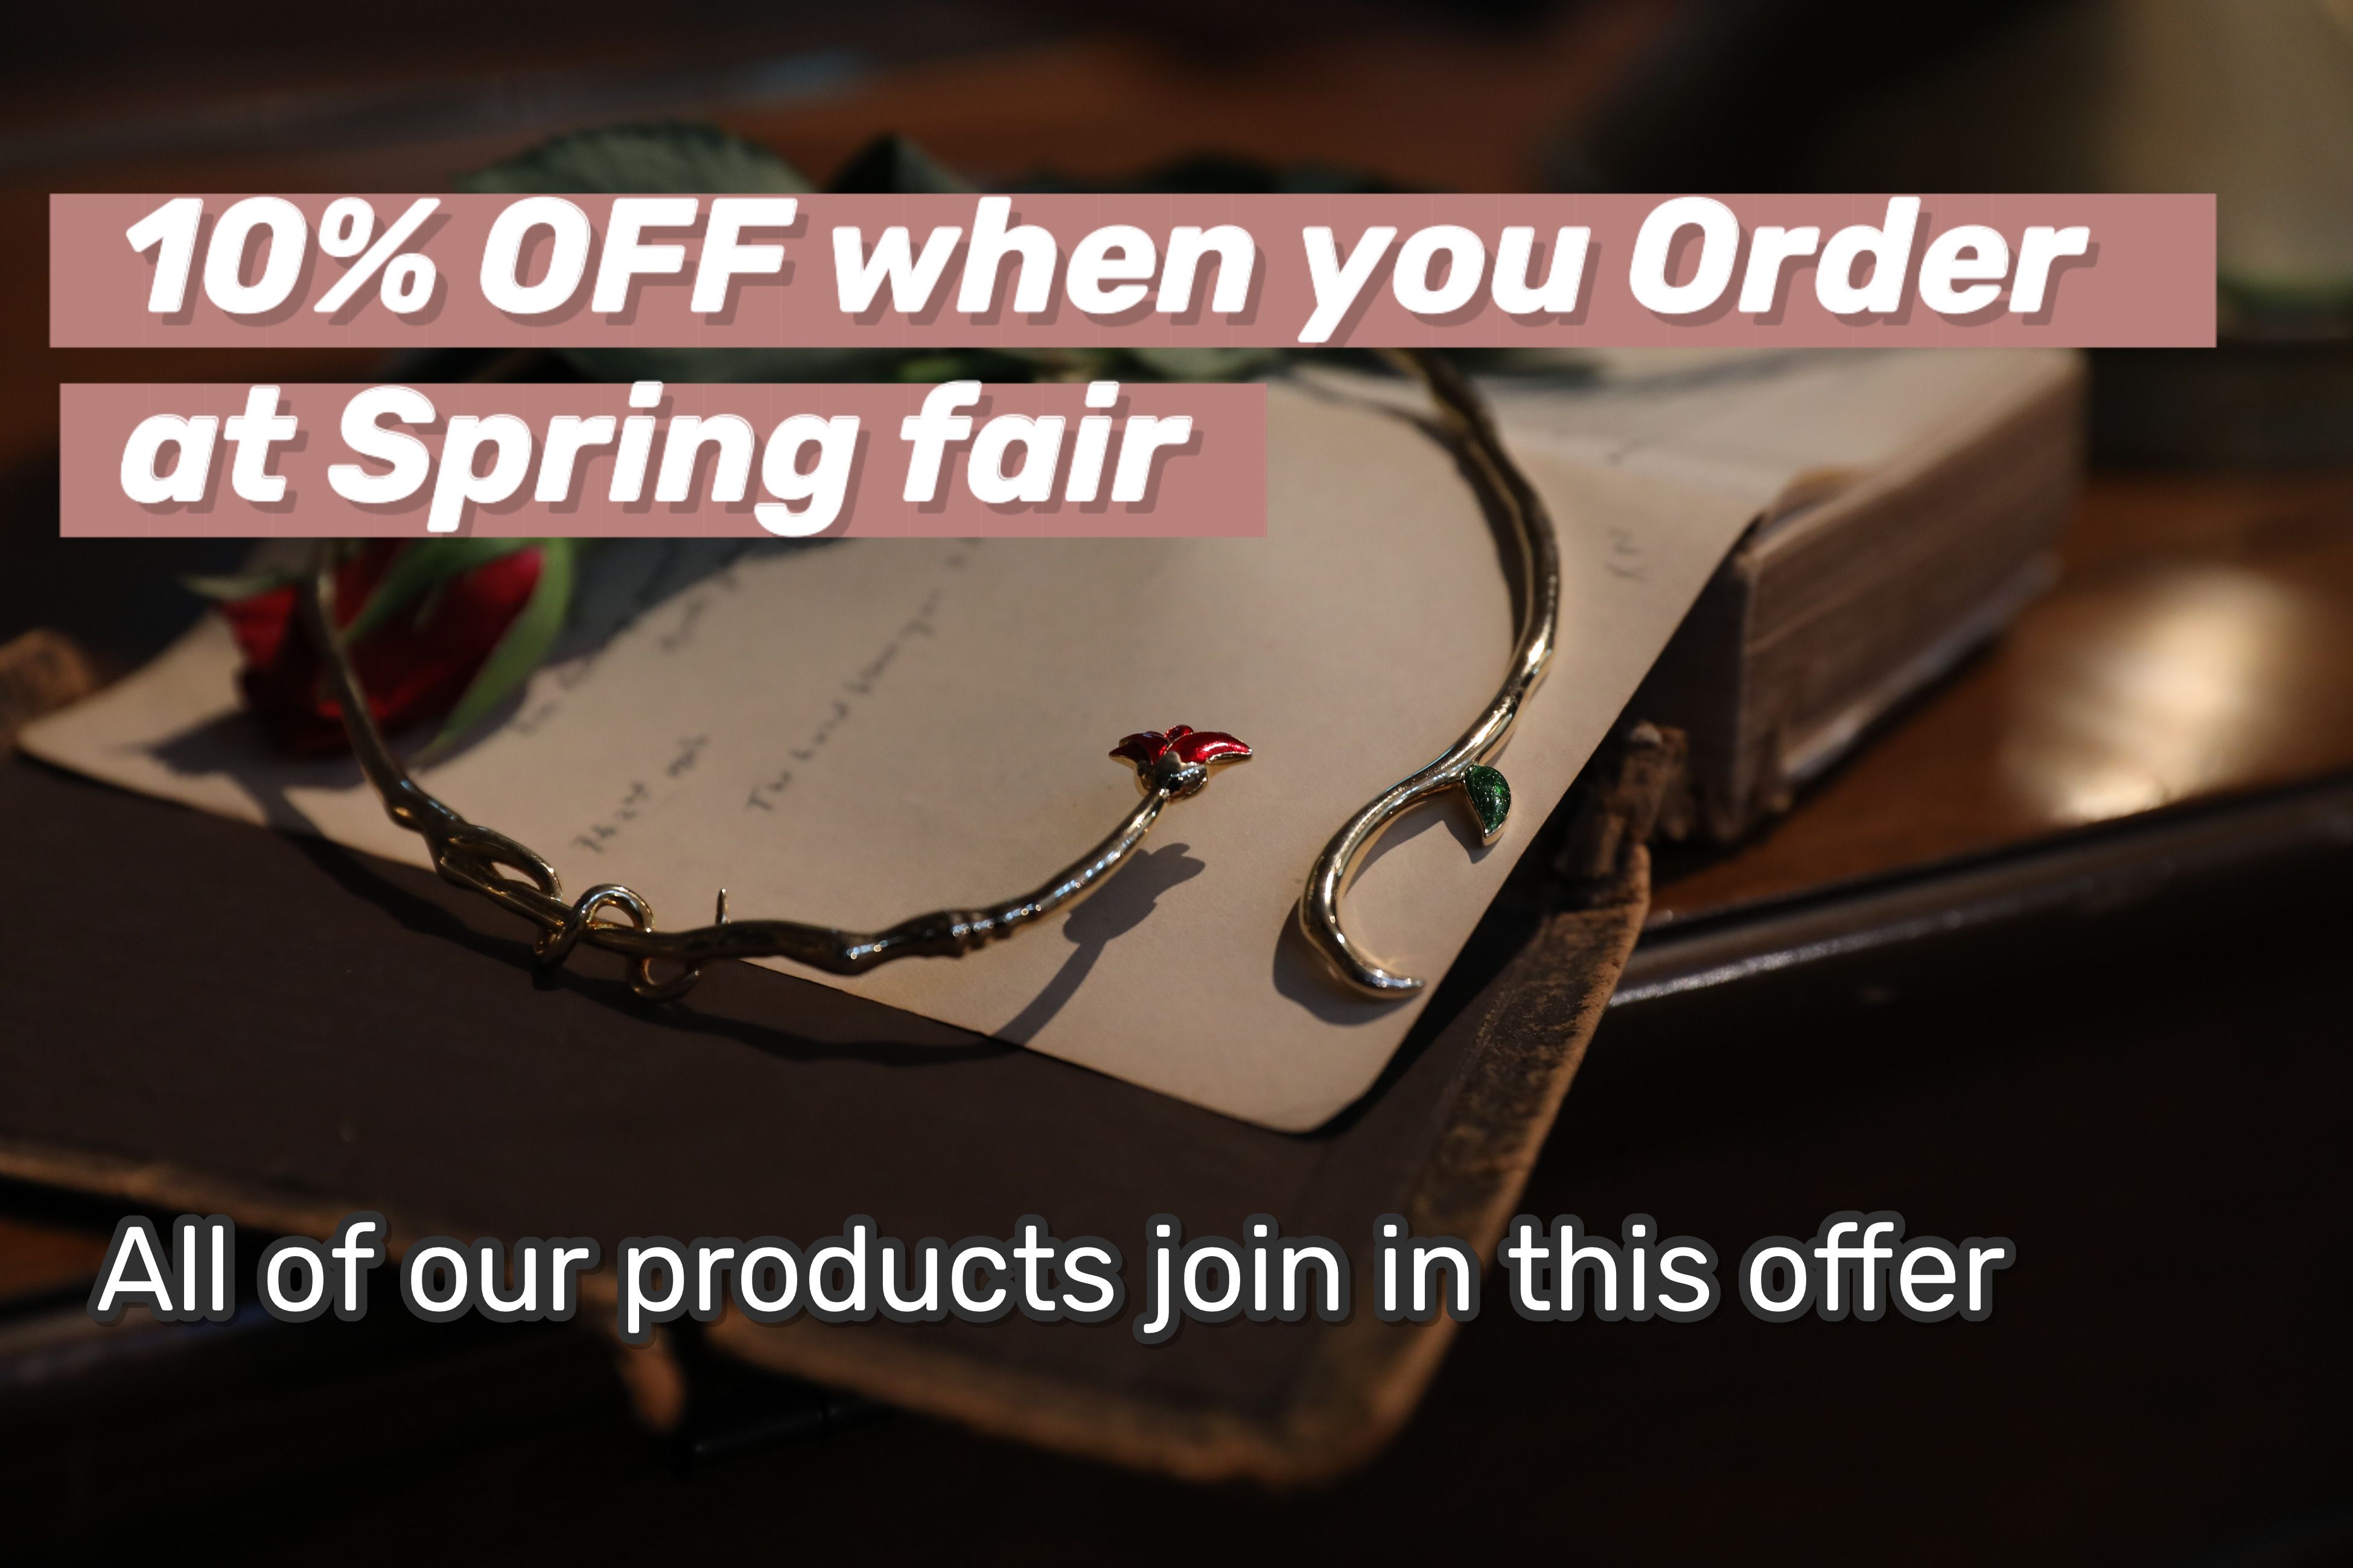 10% OFF when you order at Spring Fair